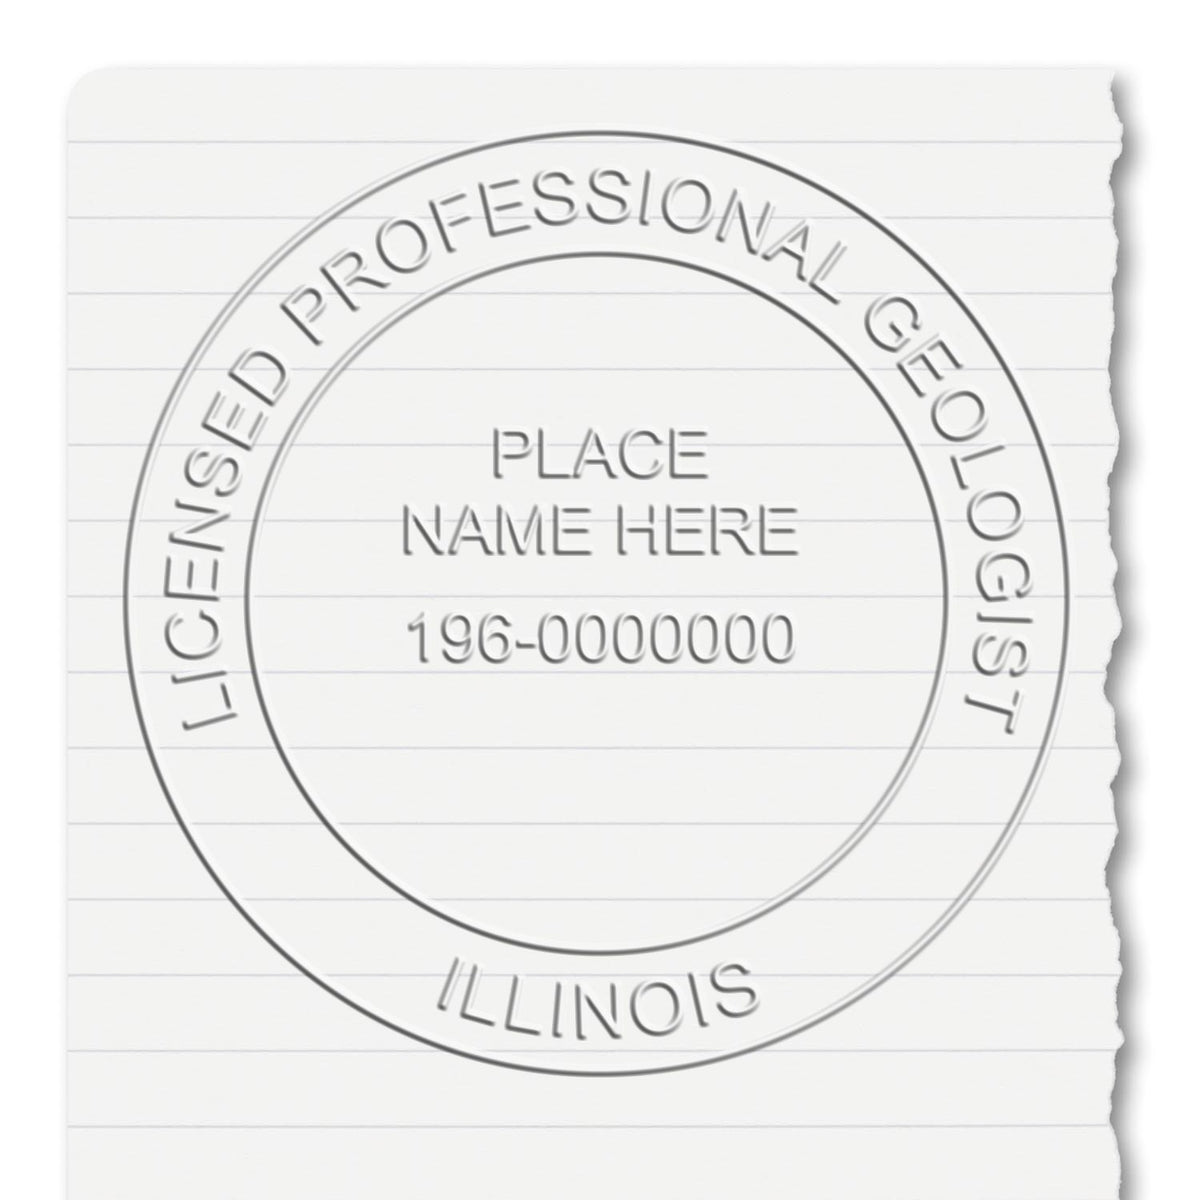 A lifestyle photo showing a stamped image of the Heavy Duty Cast Iron Illinois Geologist Seal Embosser on a piece of paper